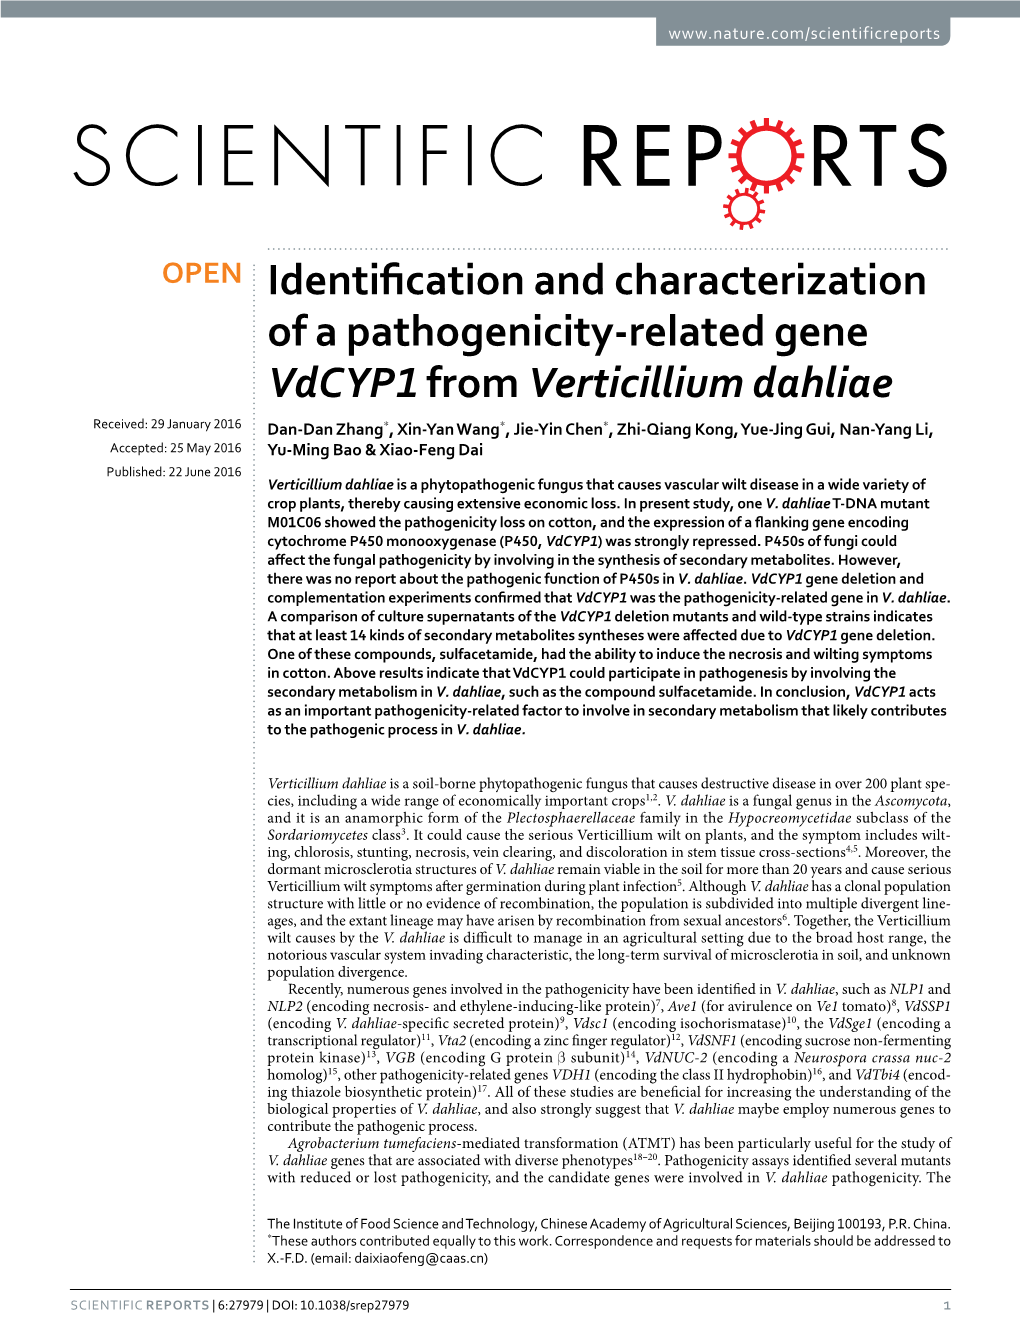 Identification and Characterization of a Pathogenicity-Related Gene